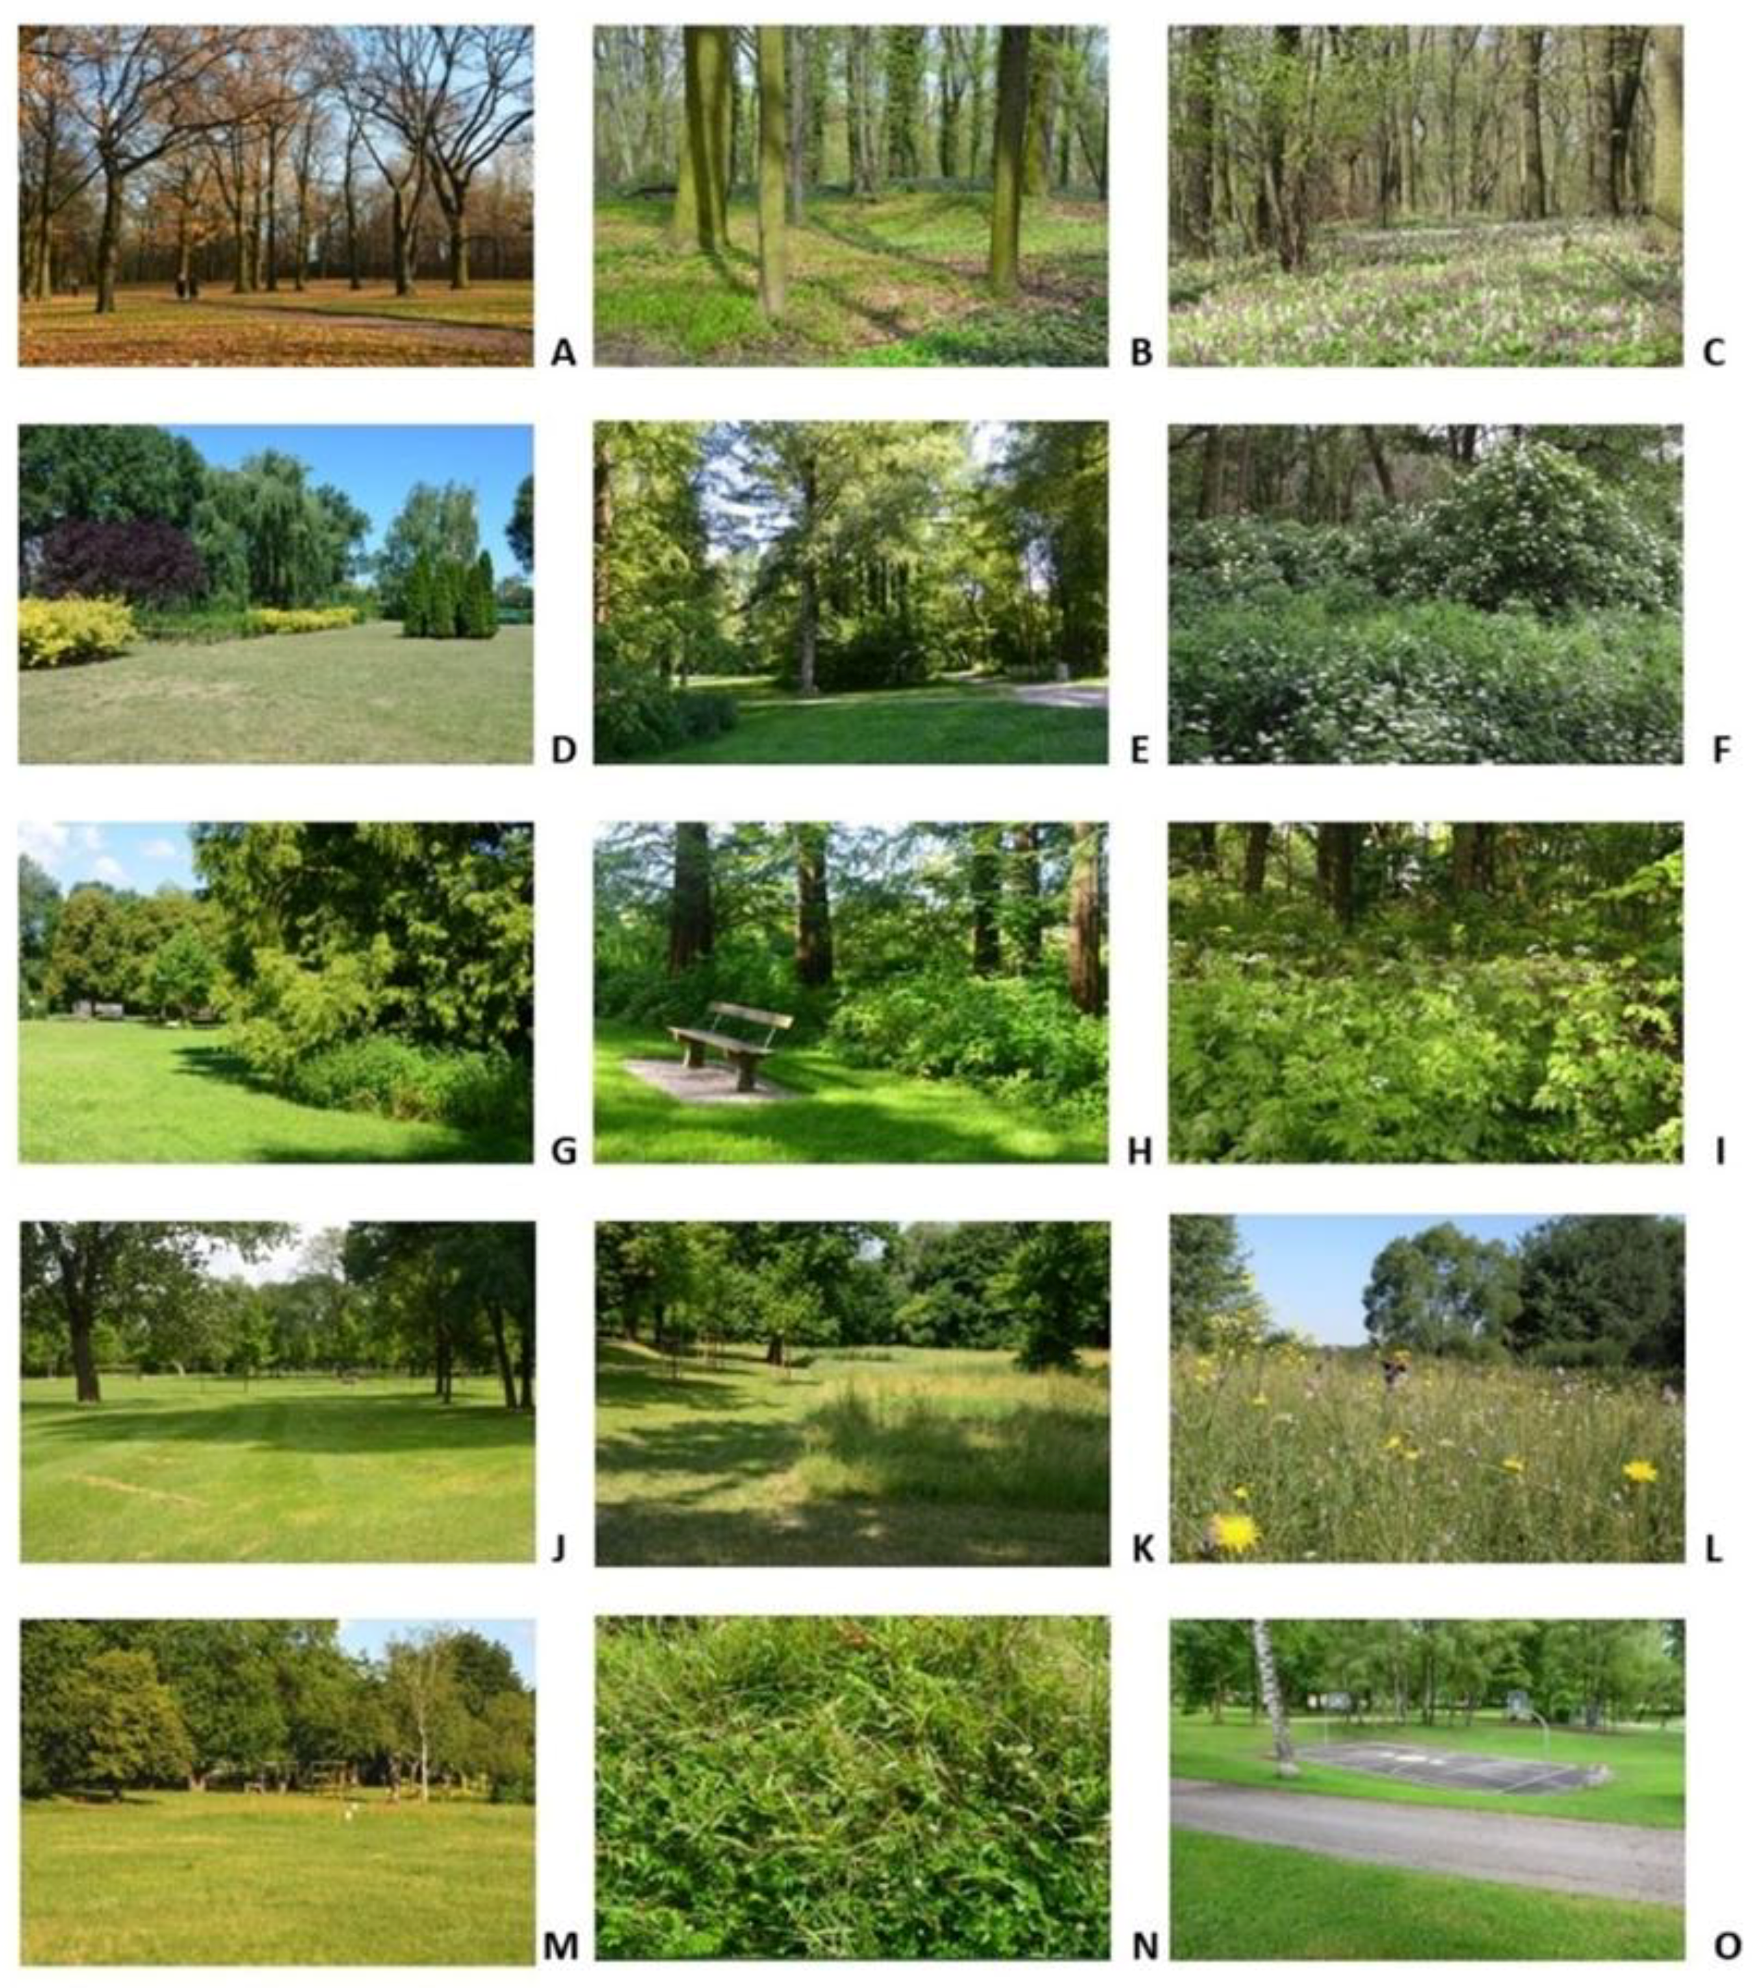 Land | Free Full-Text | Perception of the Vegetation Cover Pattern  Promoting Biodiversity in Urban Parks by Future Greenery Managers